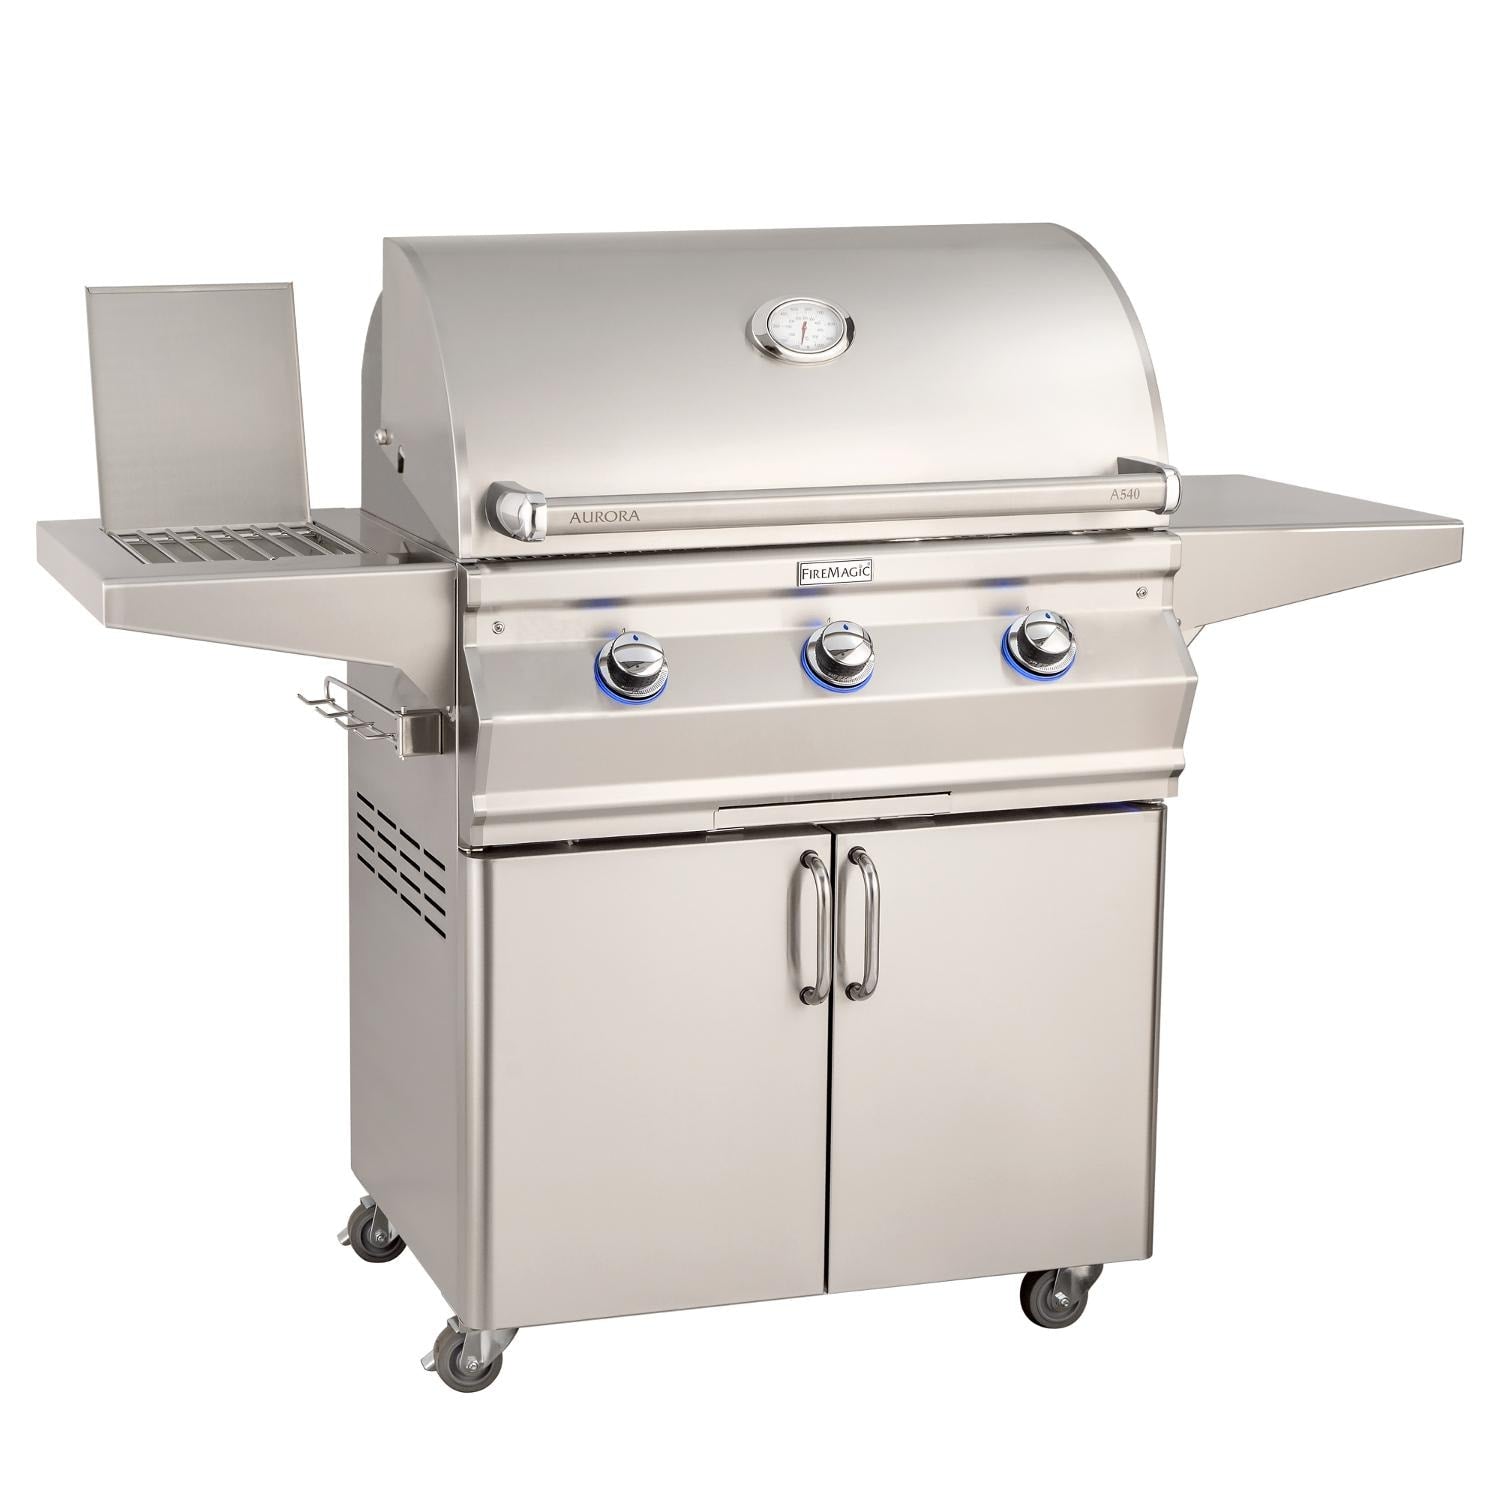 Fire Magic - Aurora A540S 30-Inch Propane Gas Grill With Side Burner And Analog Thermometer - A540S-7EAP-62